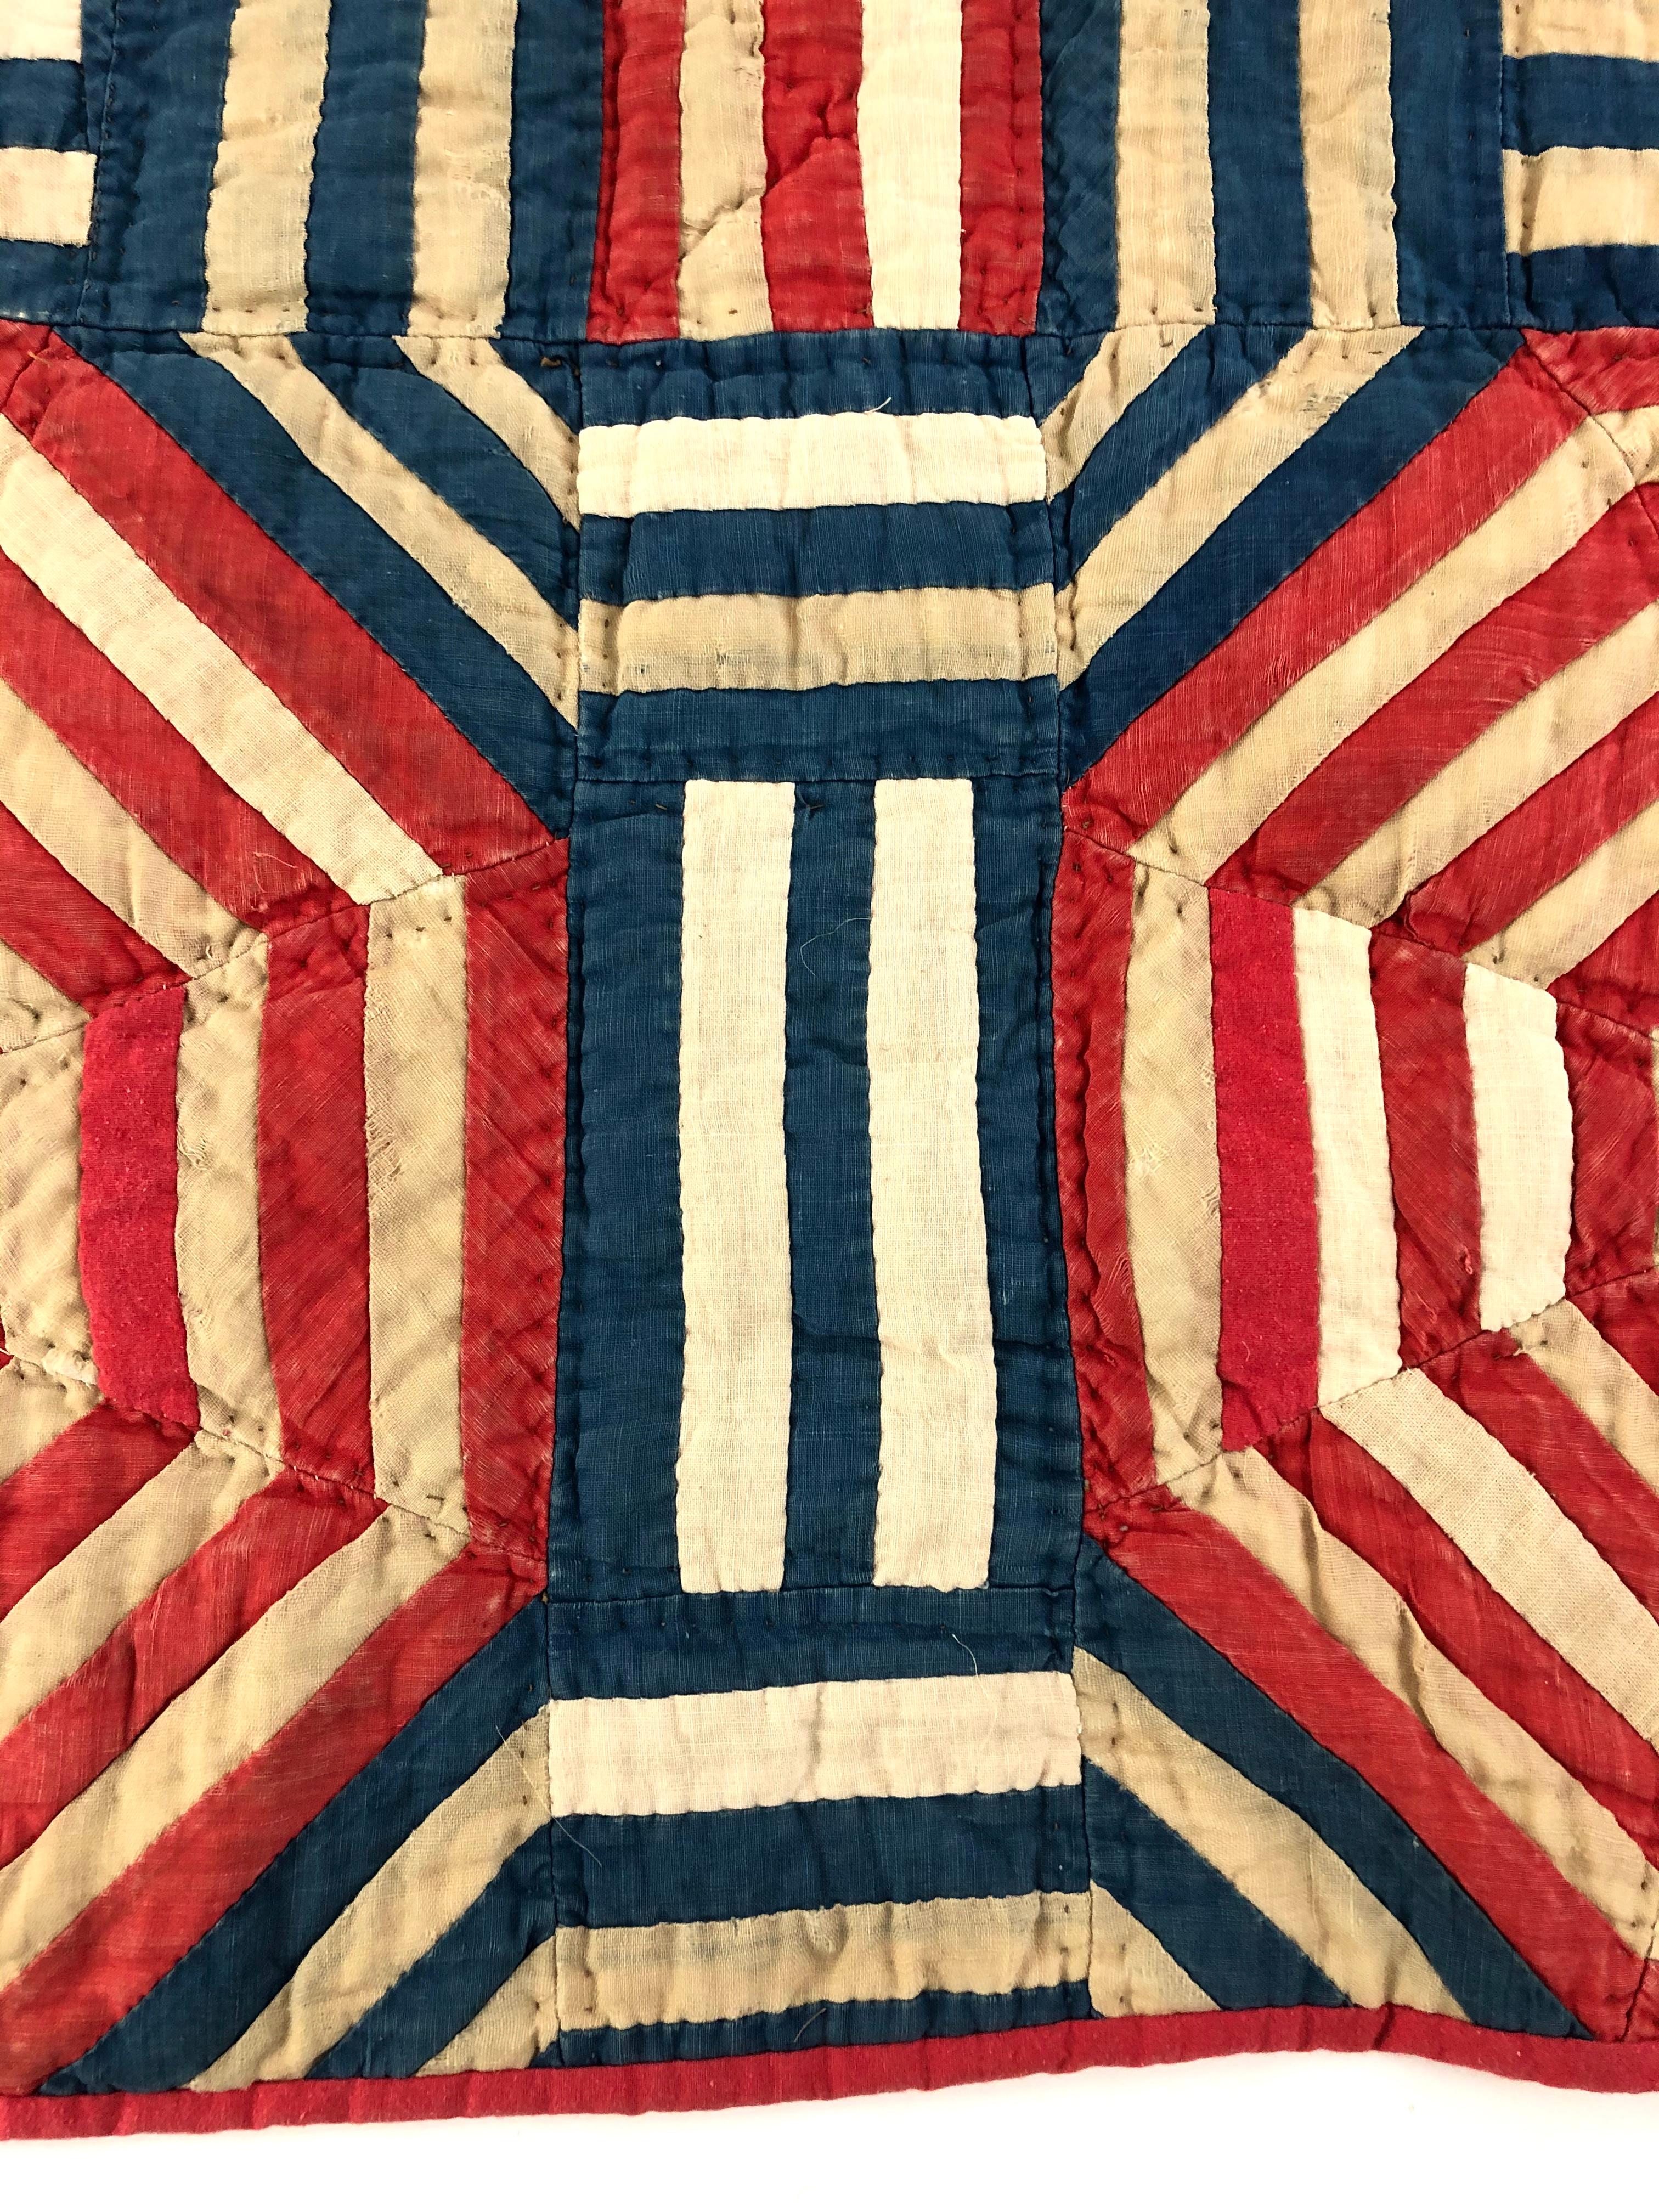 Cotton American Folk Art Red White and Blue Geometric Crib Quilt Wall Hanging, c. 1876